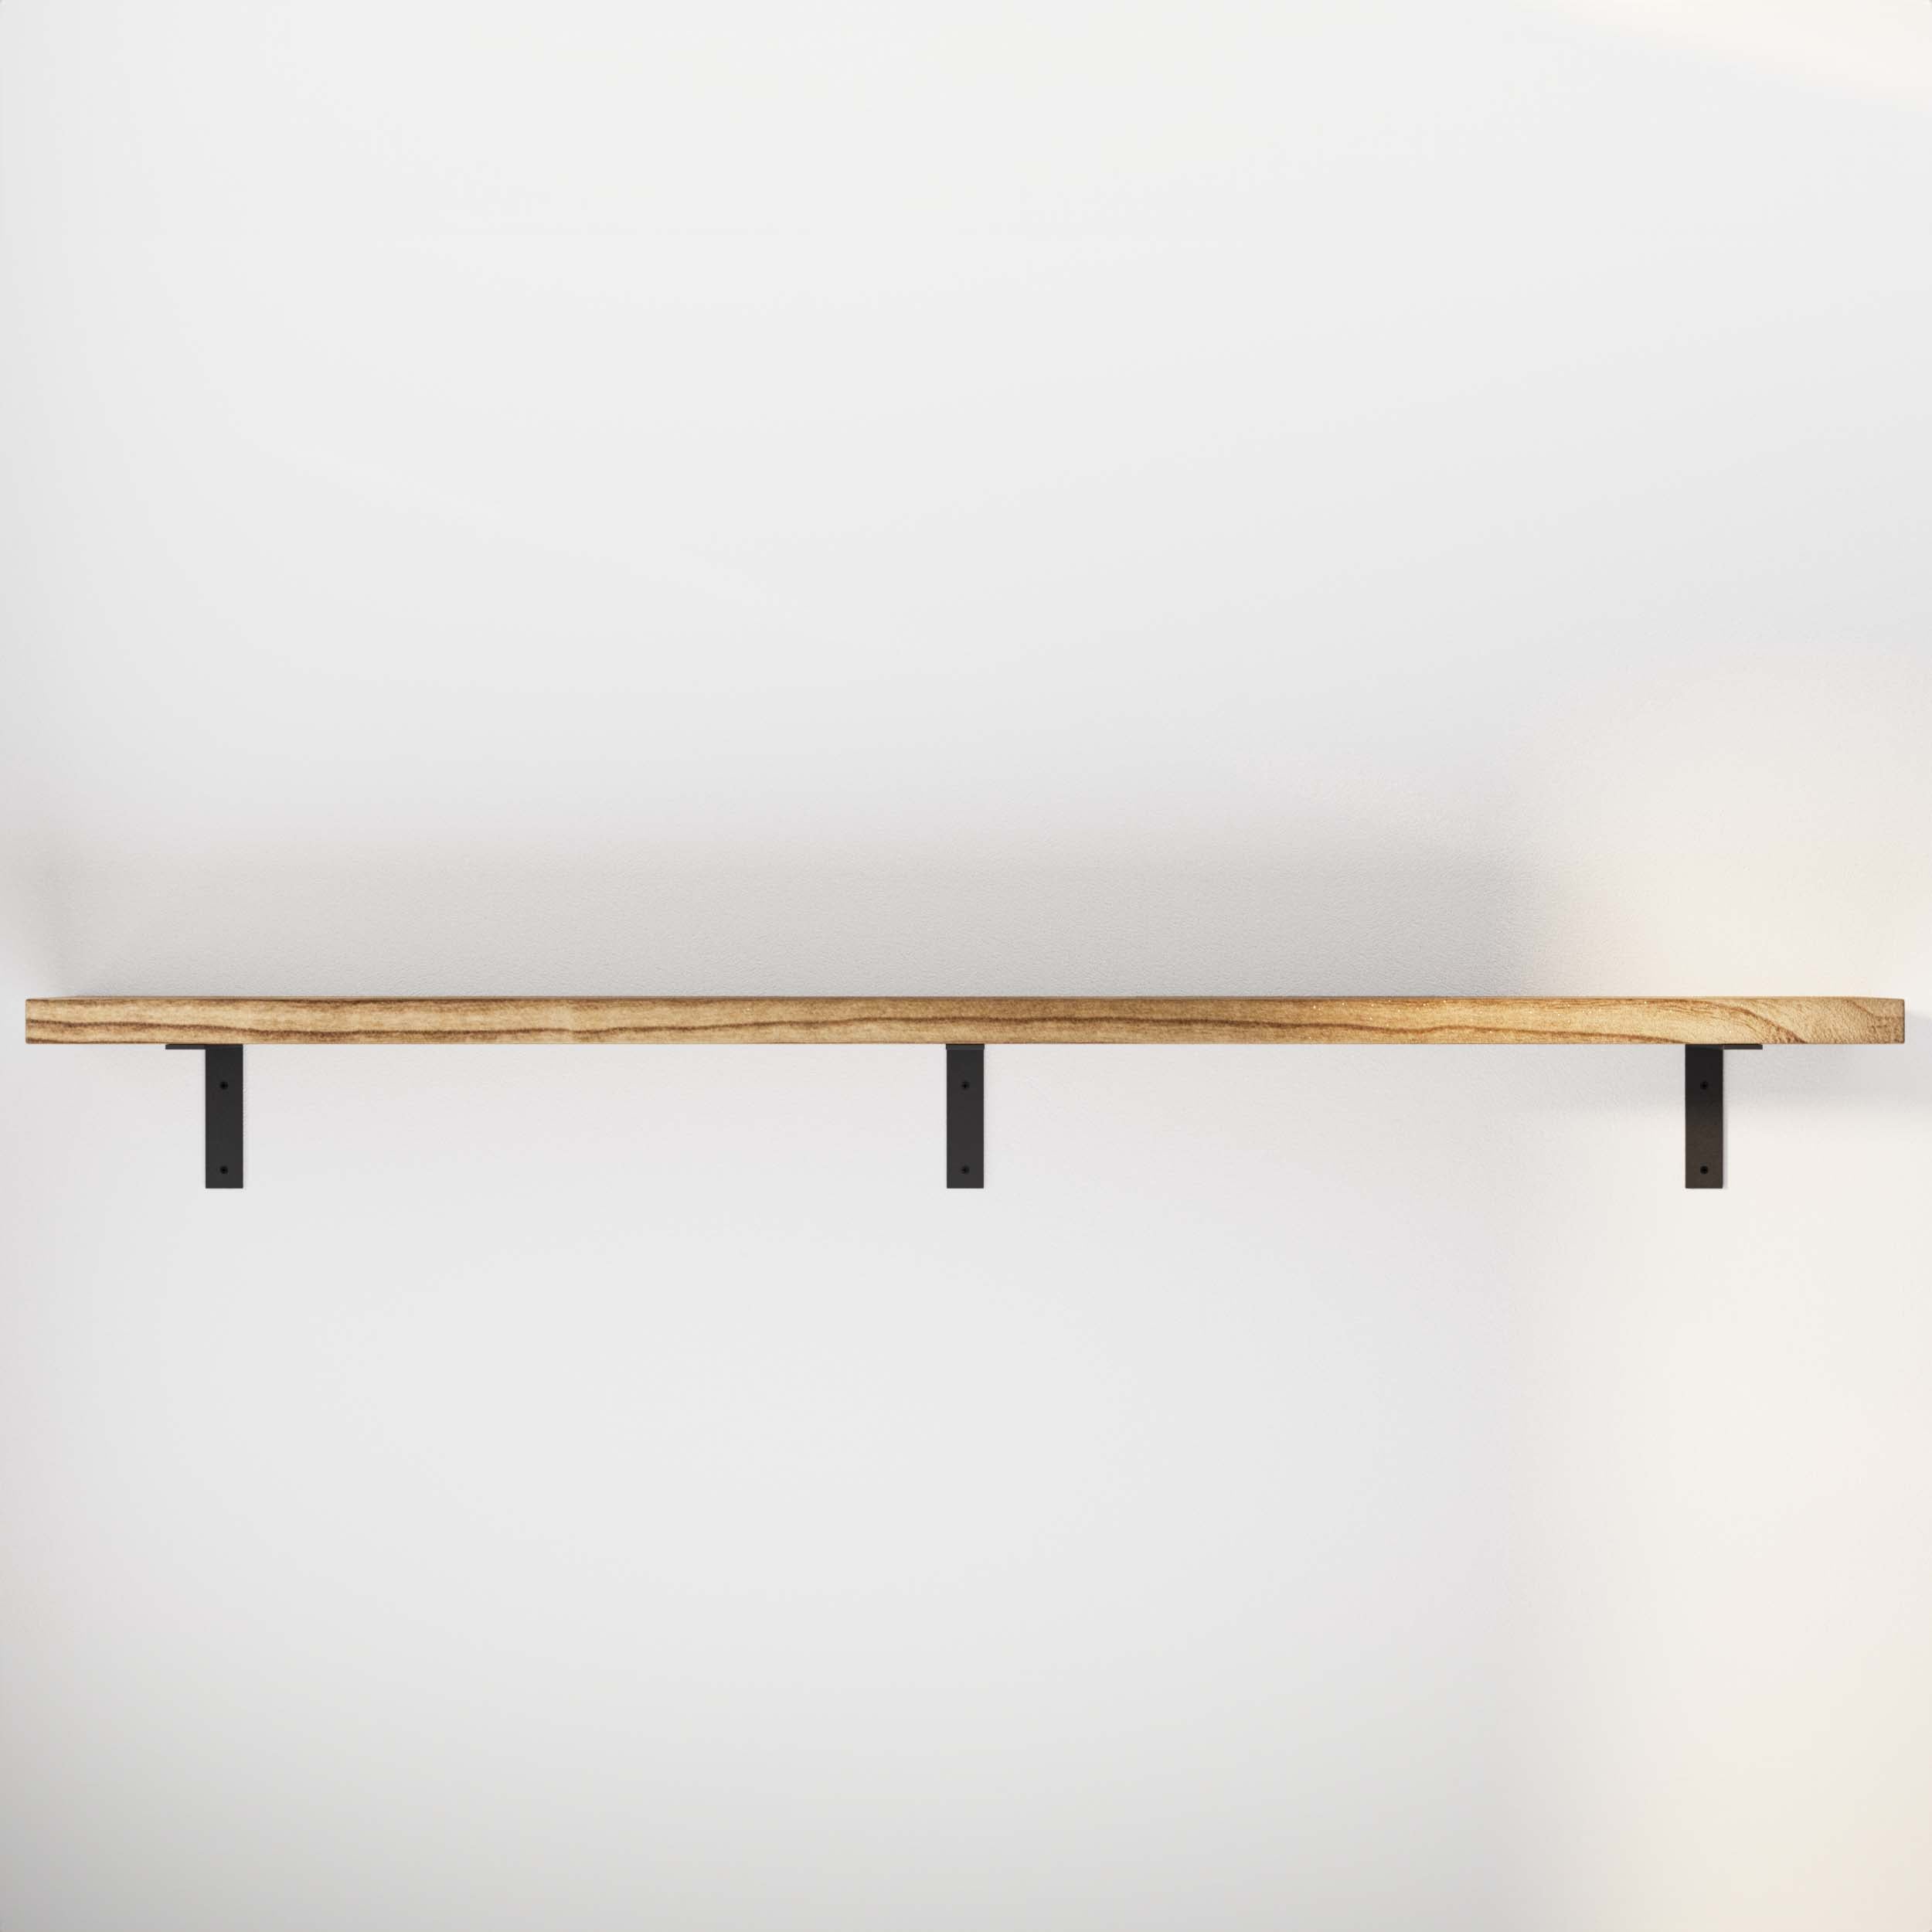 An empty wooden shelf showcasing its texture and simple, functional design.